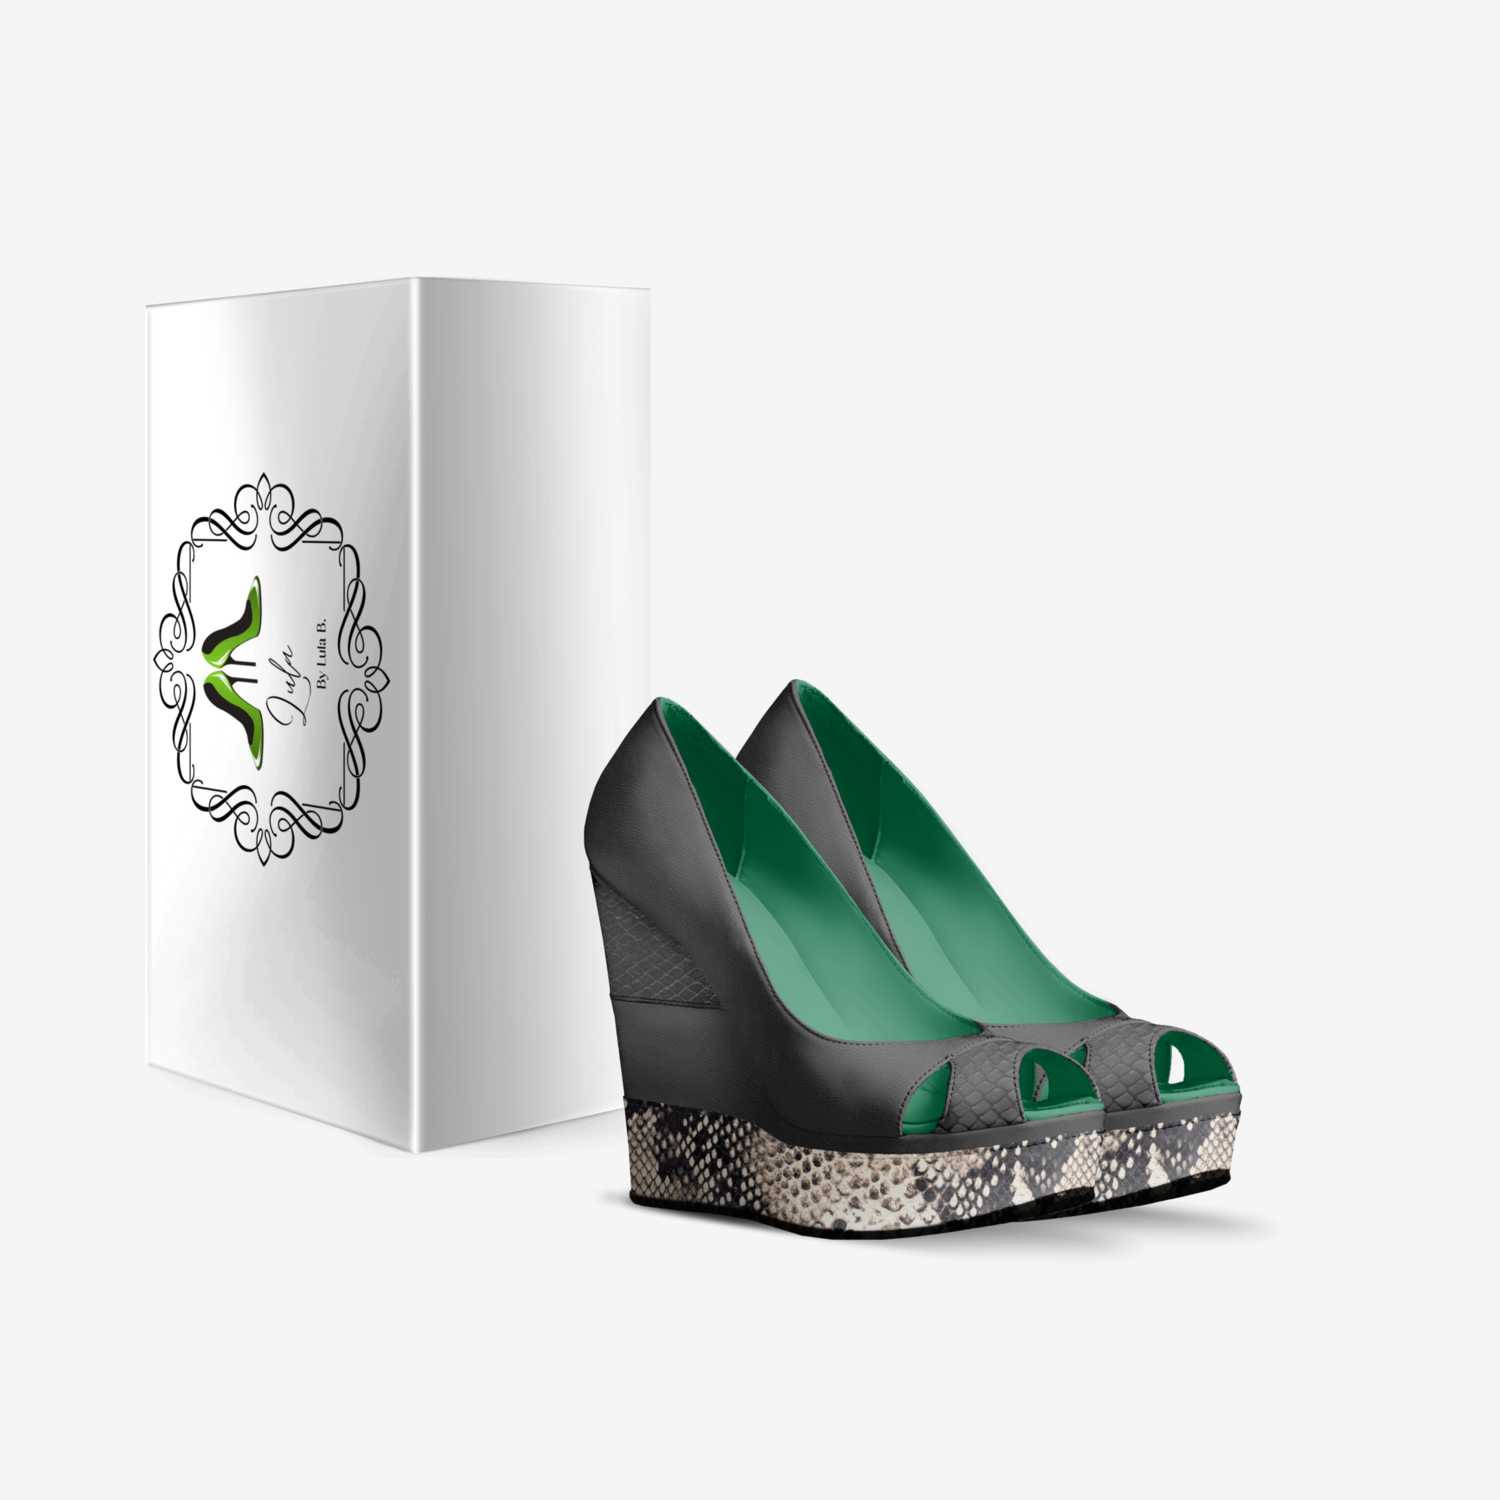 Gina custom made in Italy shoes by Lula B | Box view